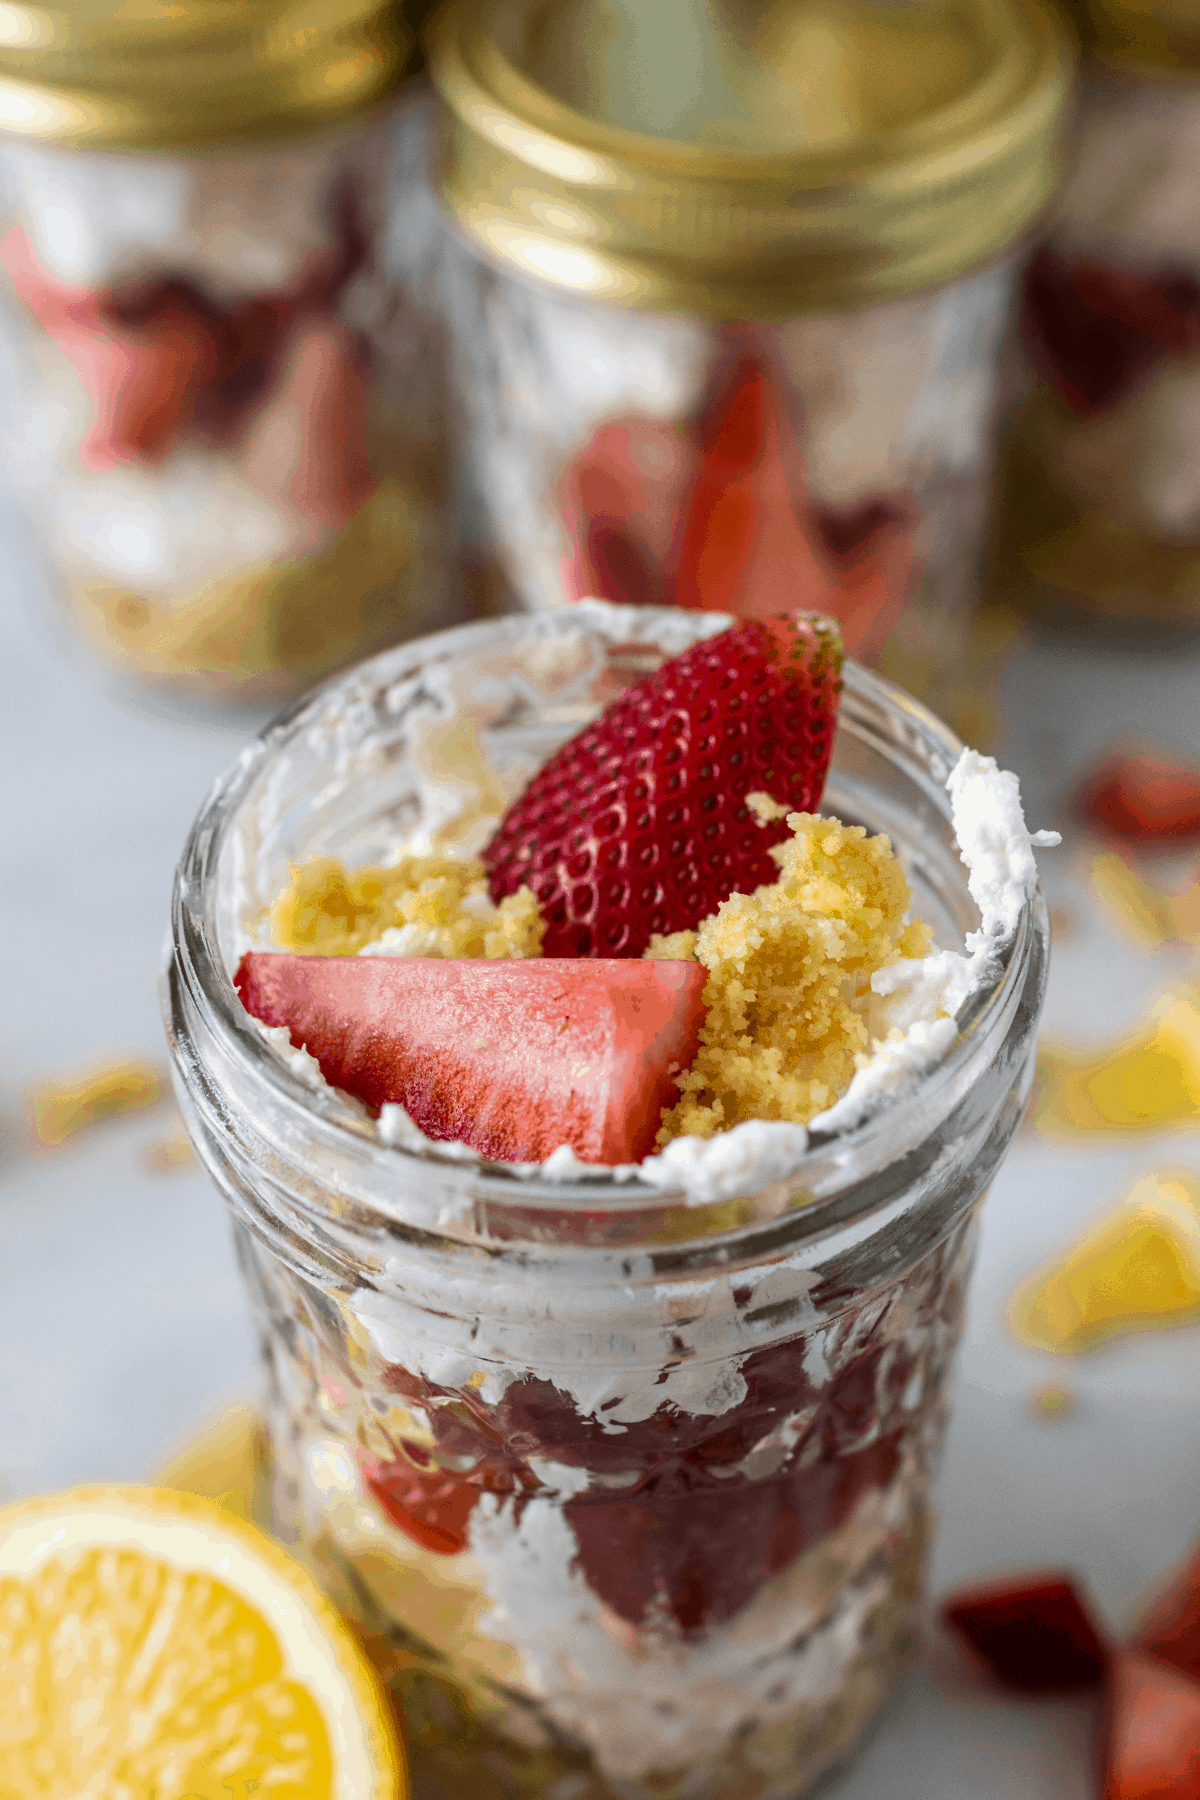 No-bake strawberry cheesecake jars with lemons next to it and more jars behind it.